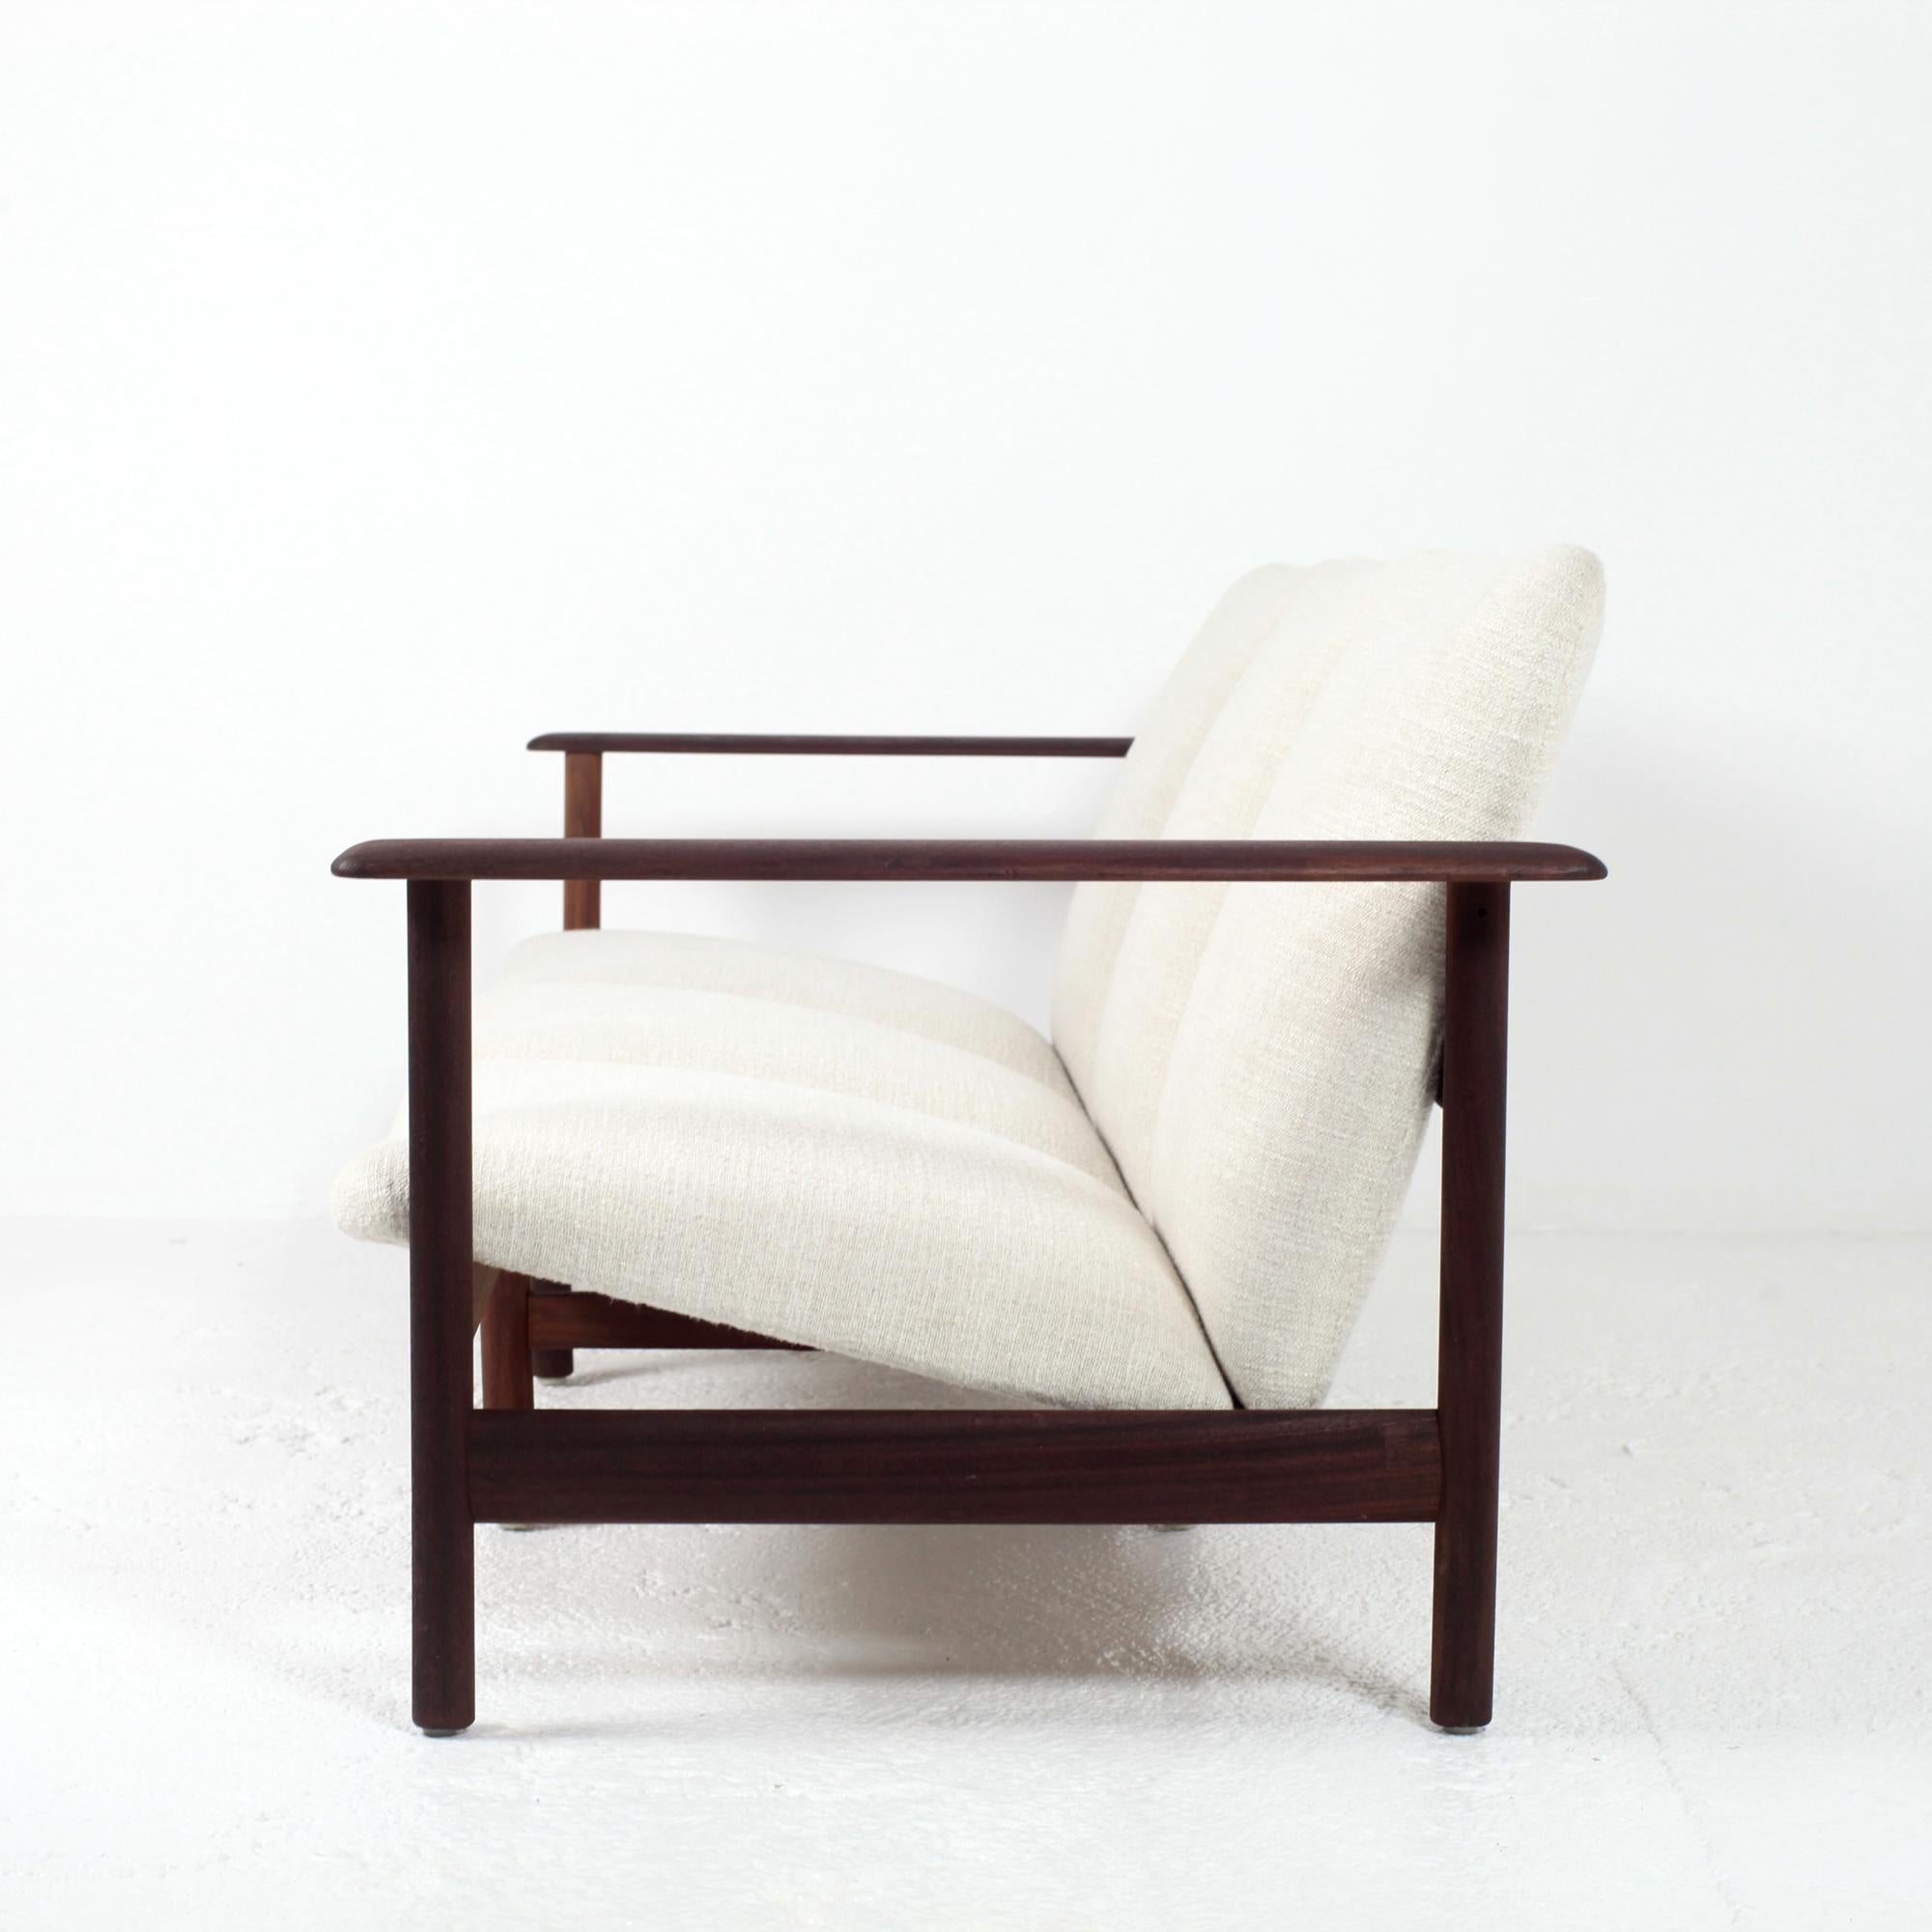 Mid-20th Century Steiner Sofa Solid Wood Frame and Pierre Frey Fabric, France, 1960s For Sale